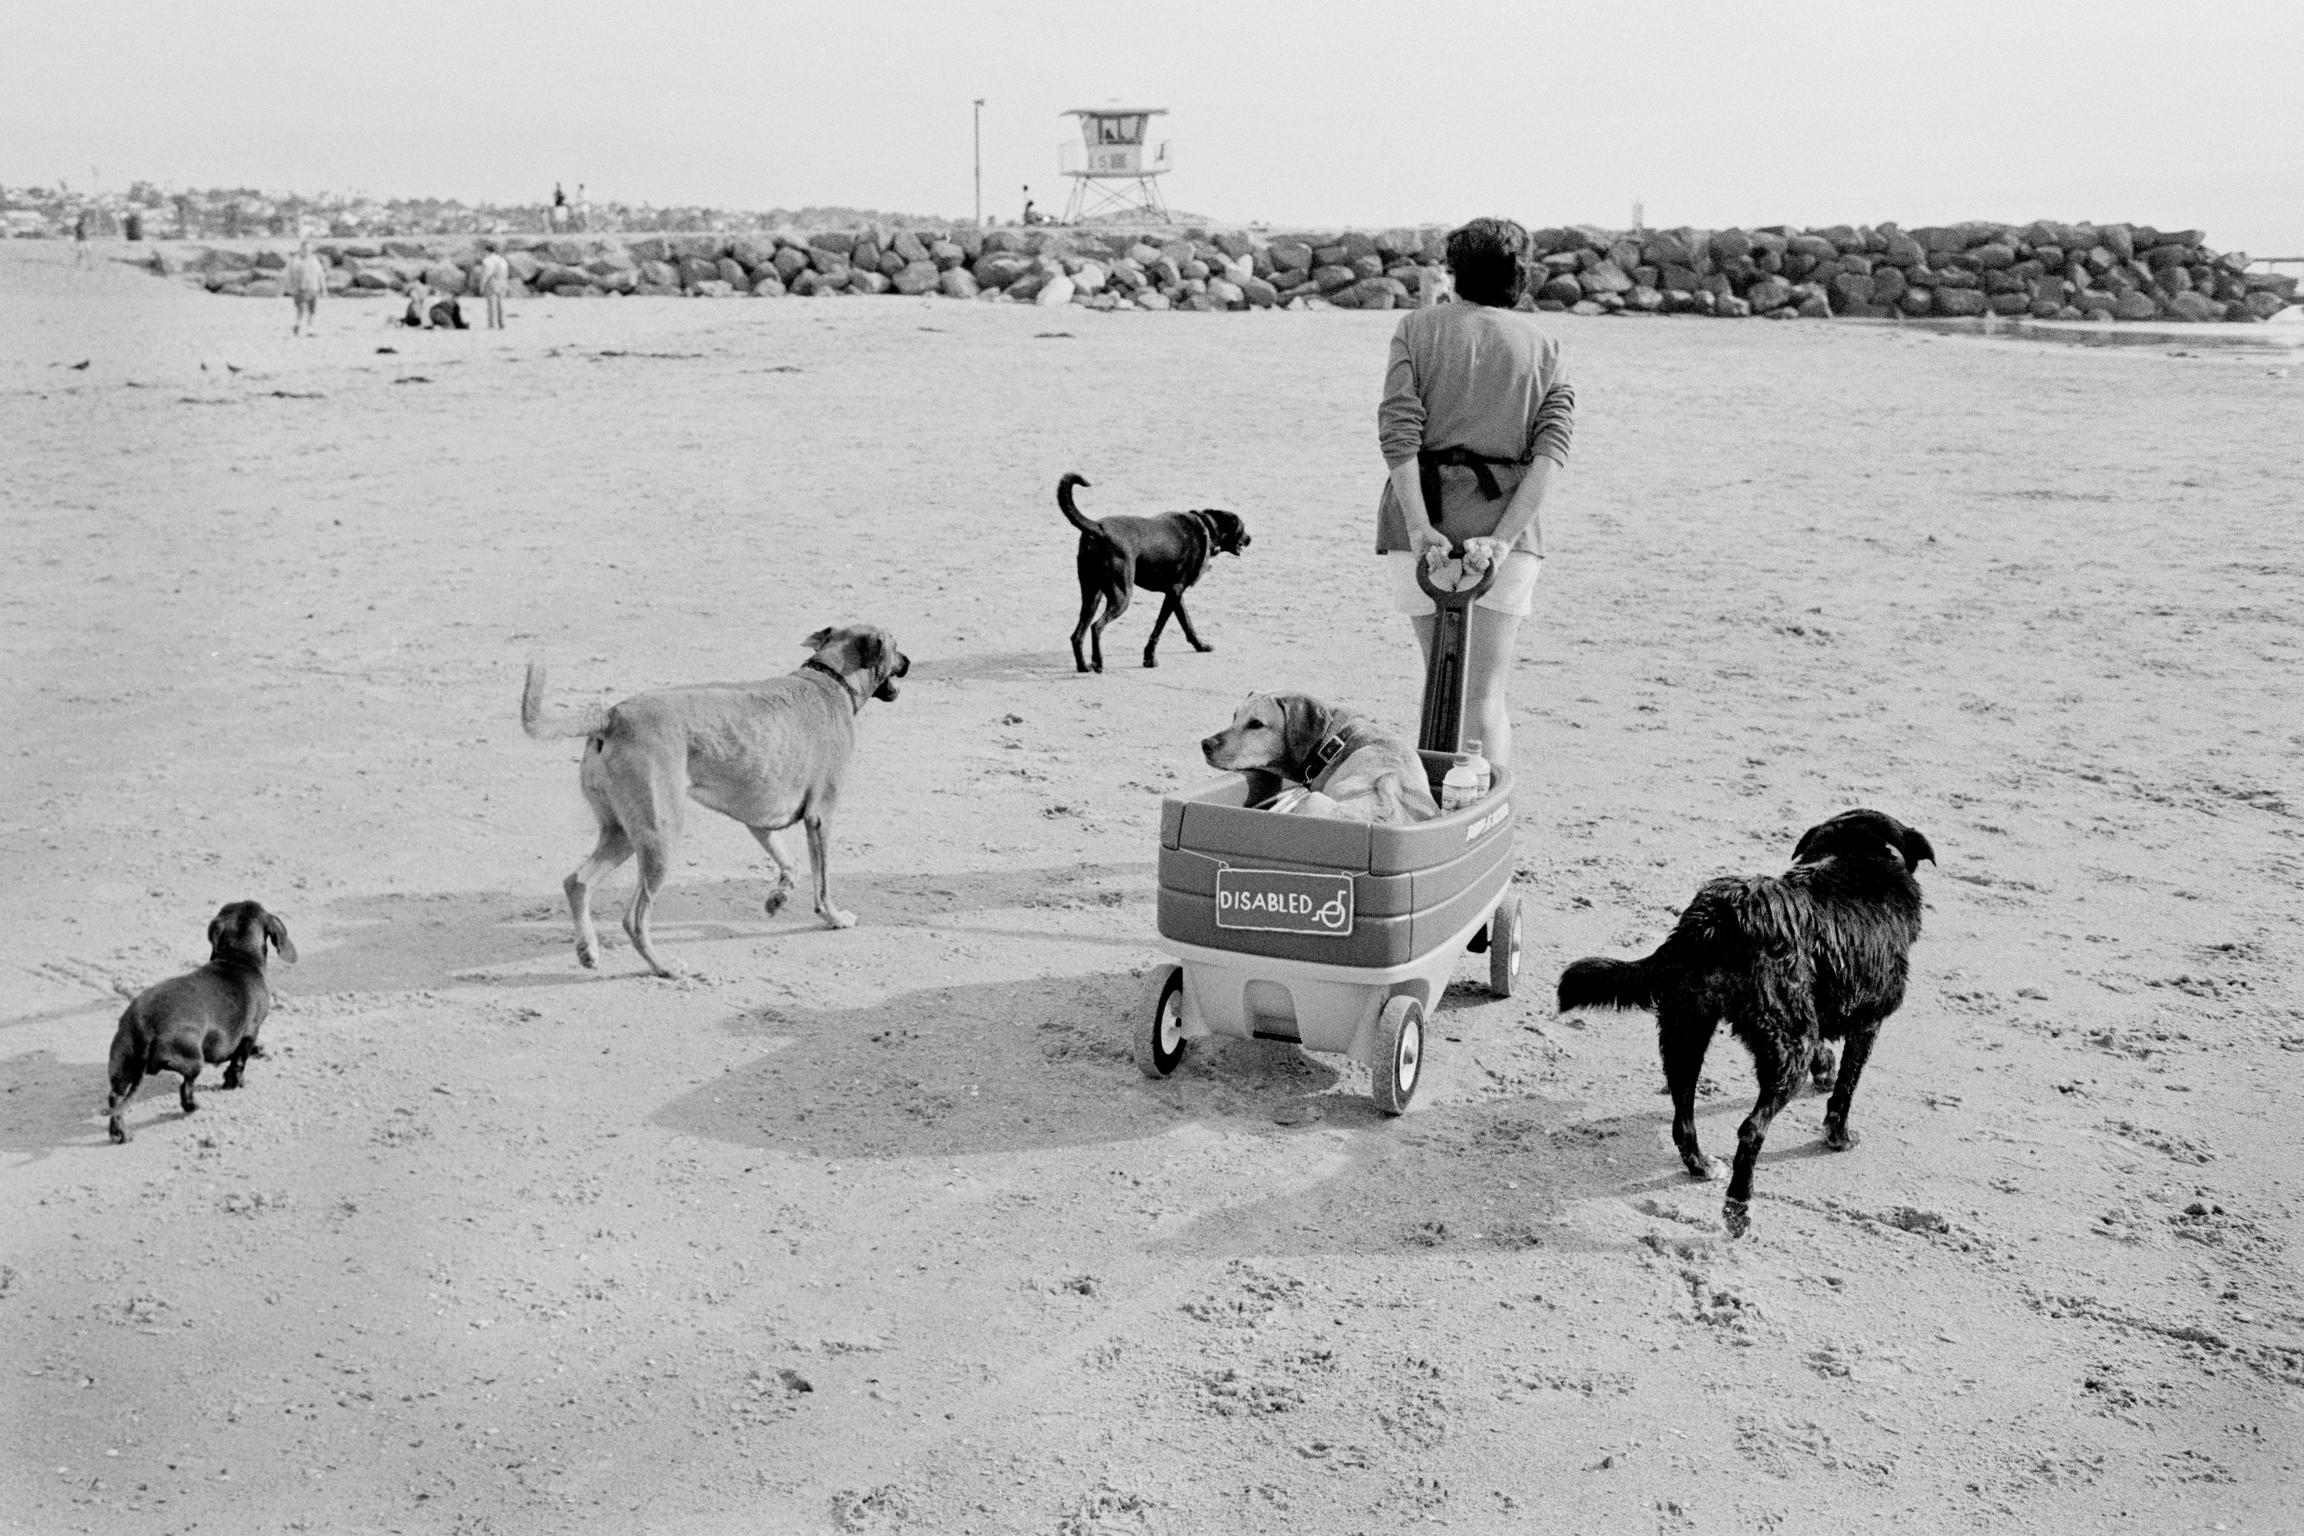 The Original Dog Beach in San Diego, CA is nationally famous and one of the first official leash-free beaches in the United States. California, USA